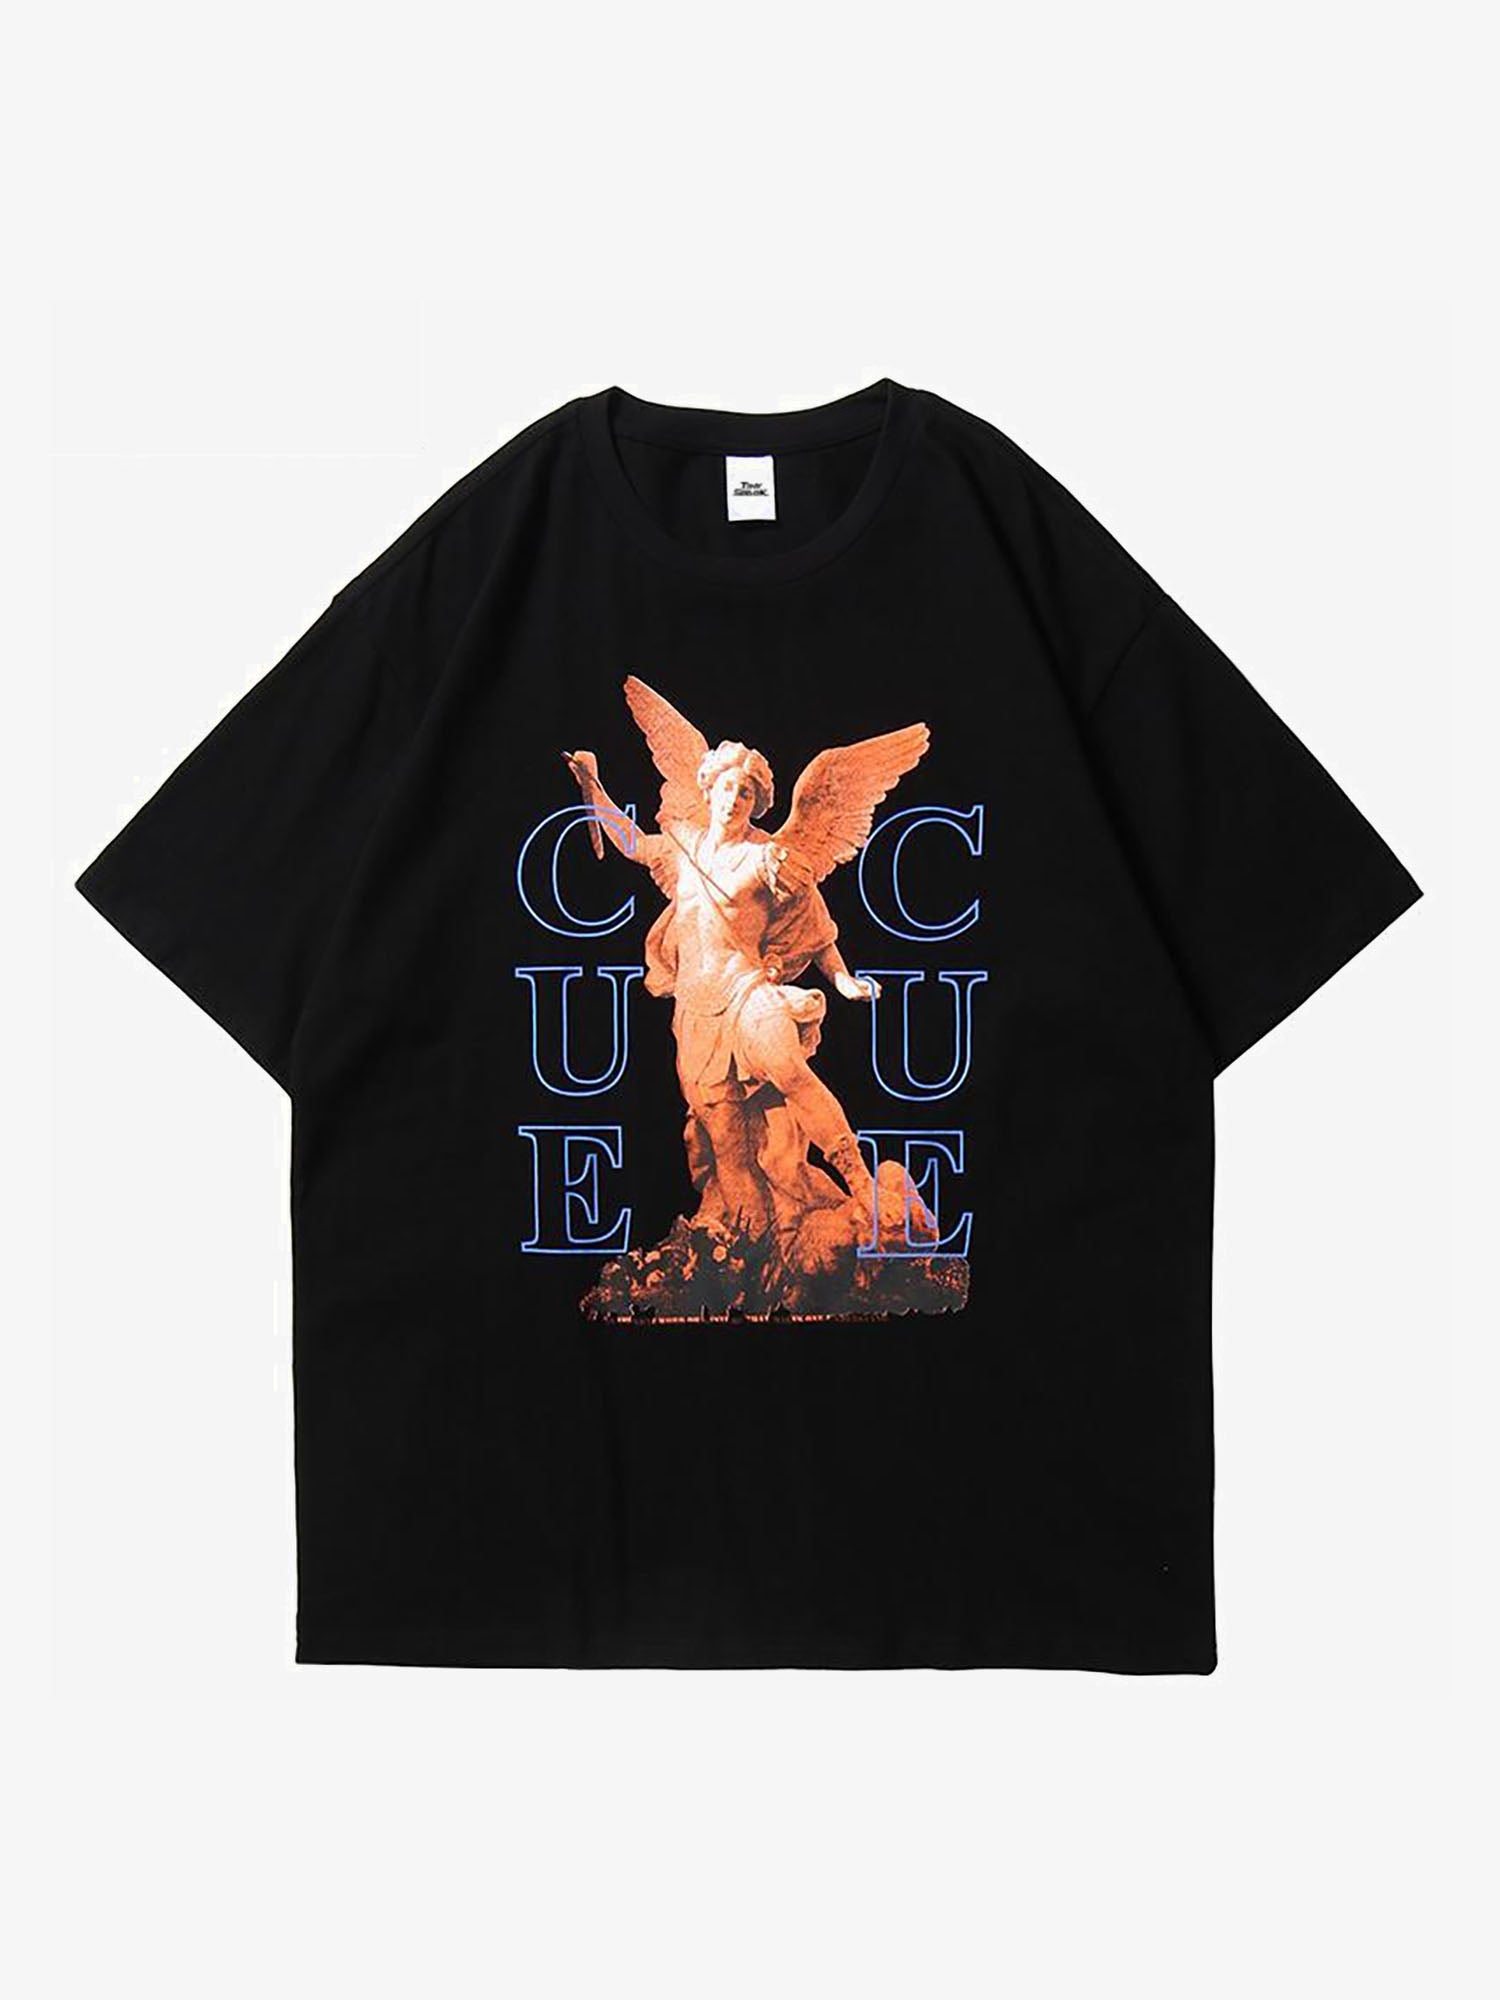 JUSTNOTAG Winged Statue Under Warm Lamp Short Sleeve Tee